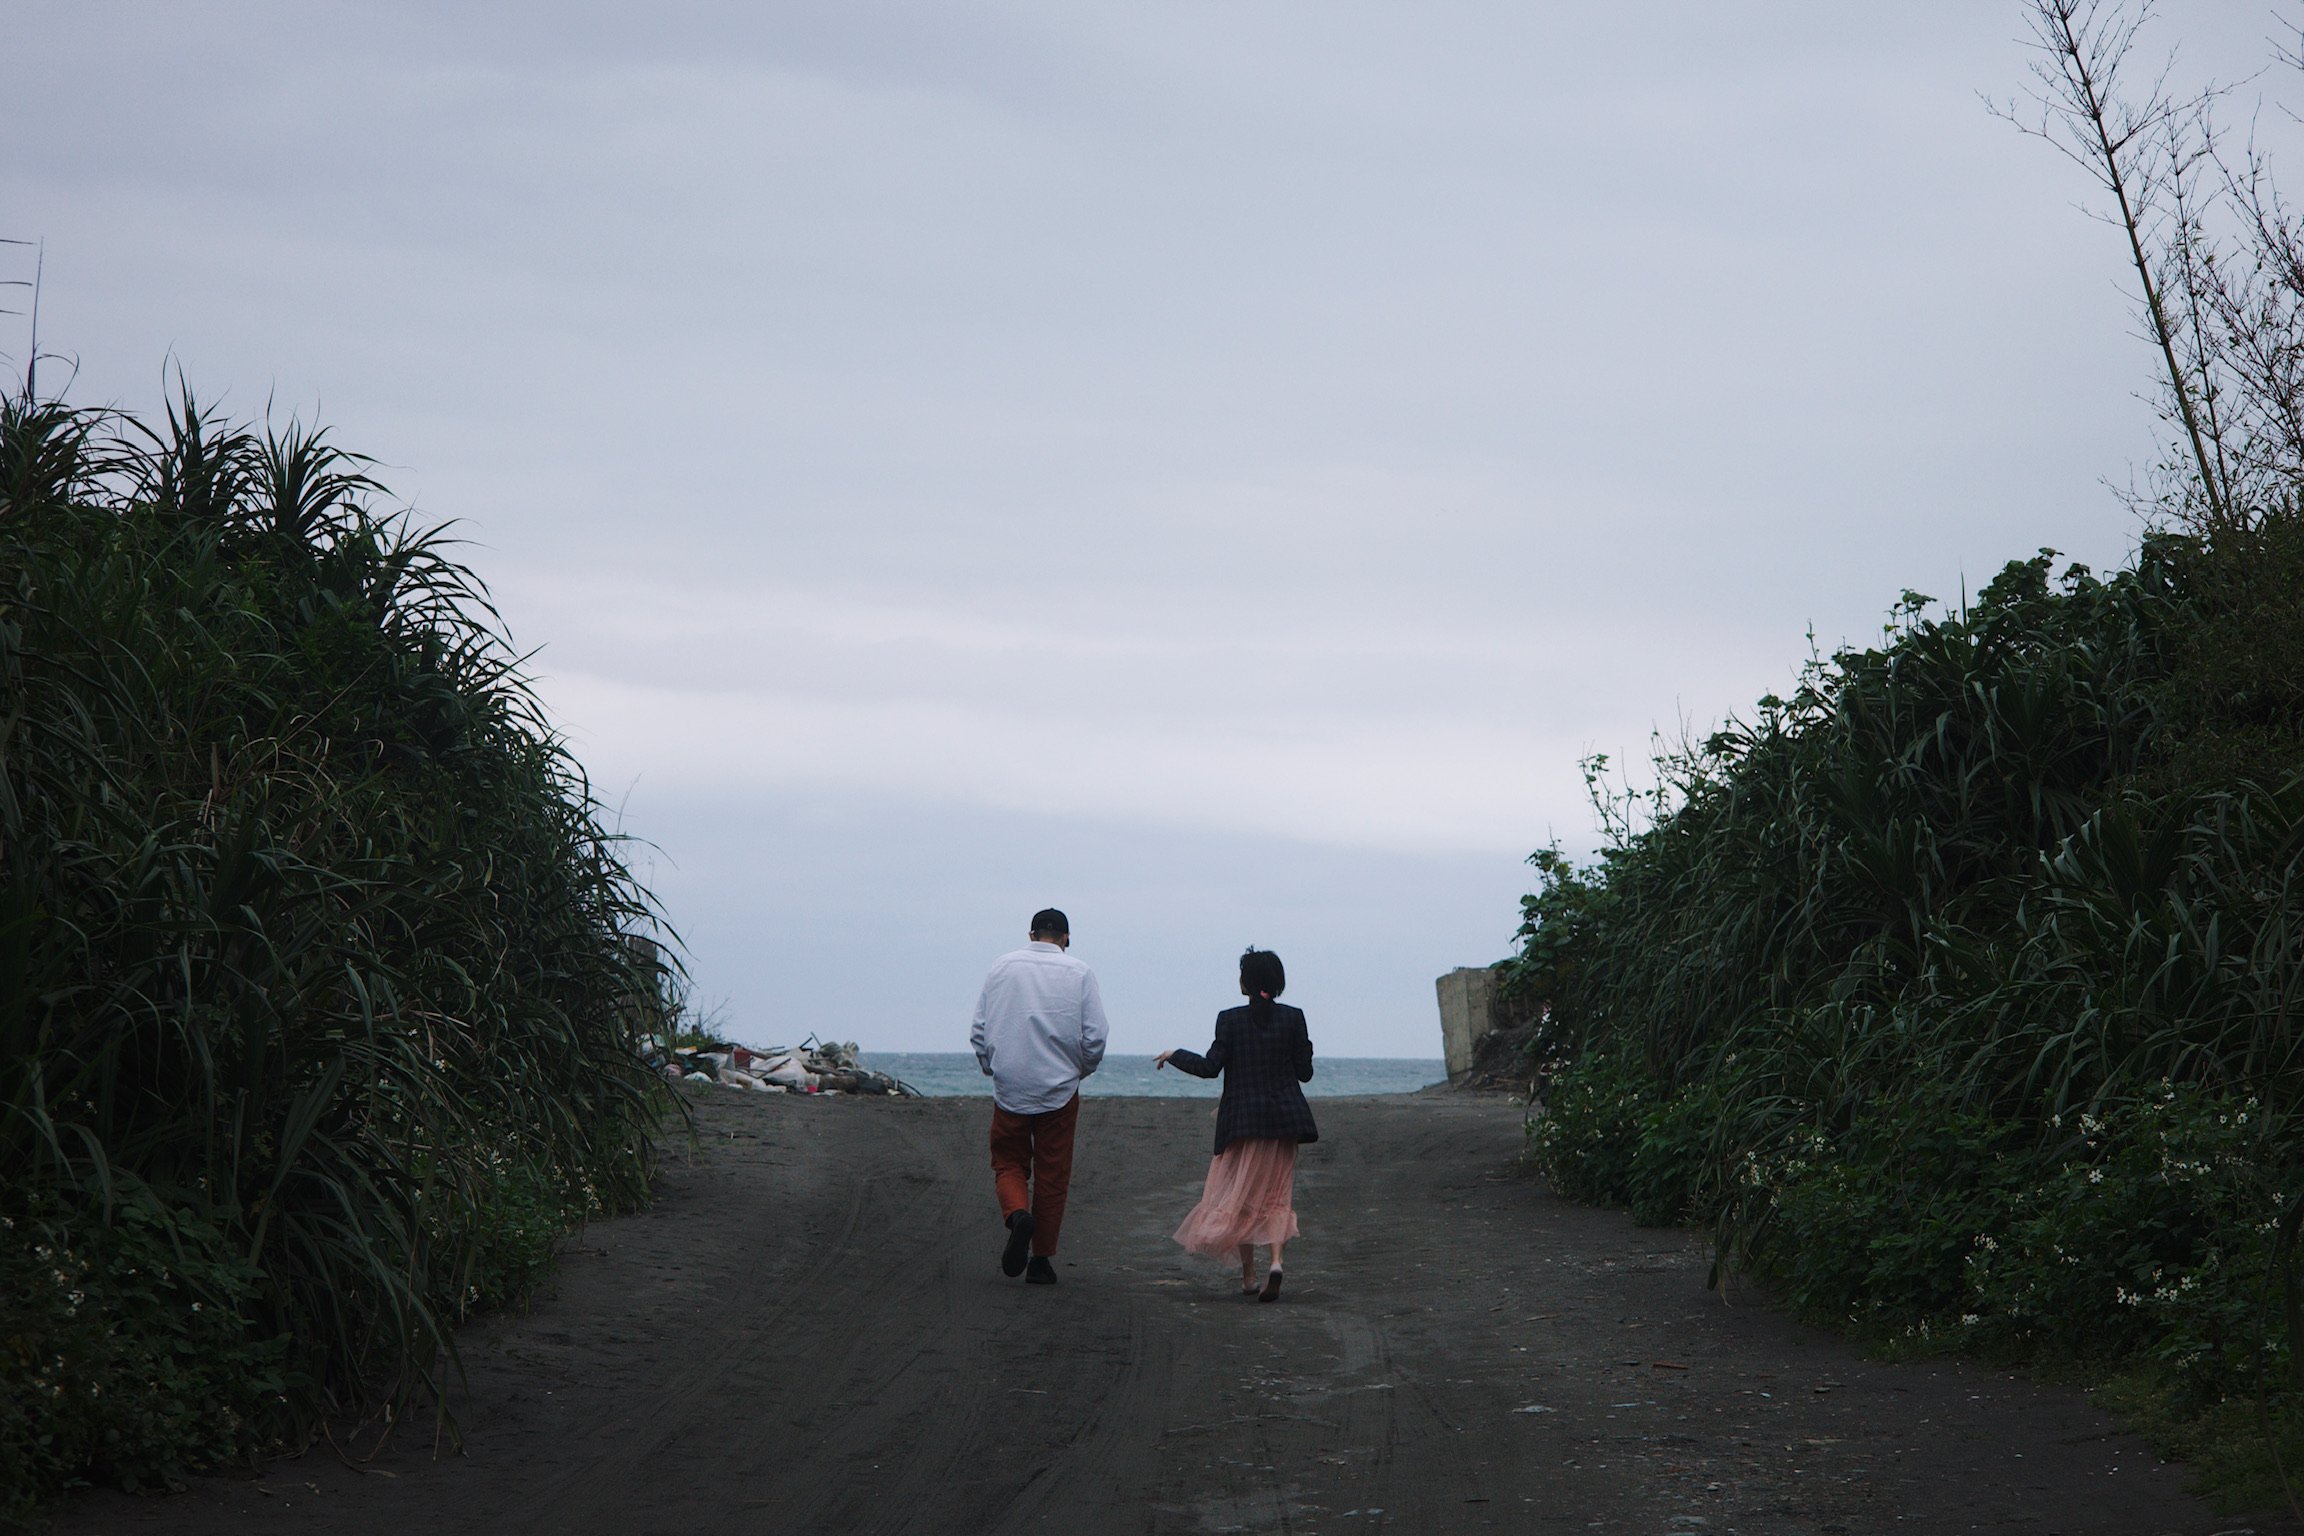 A man and a woman walking towards a beach on a cloudy day.